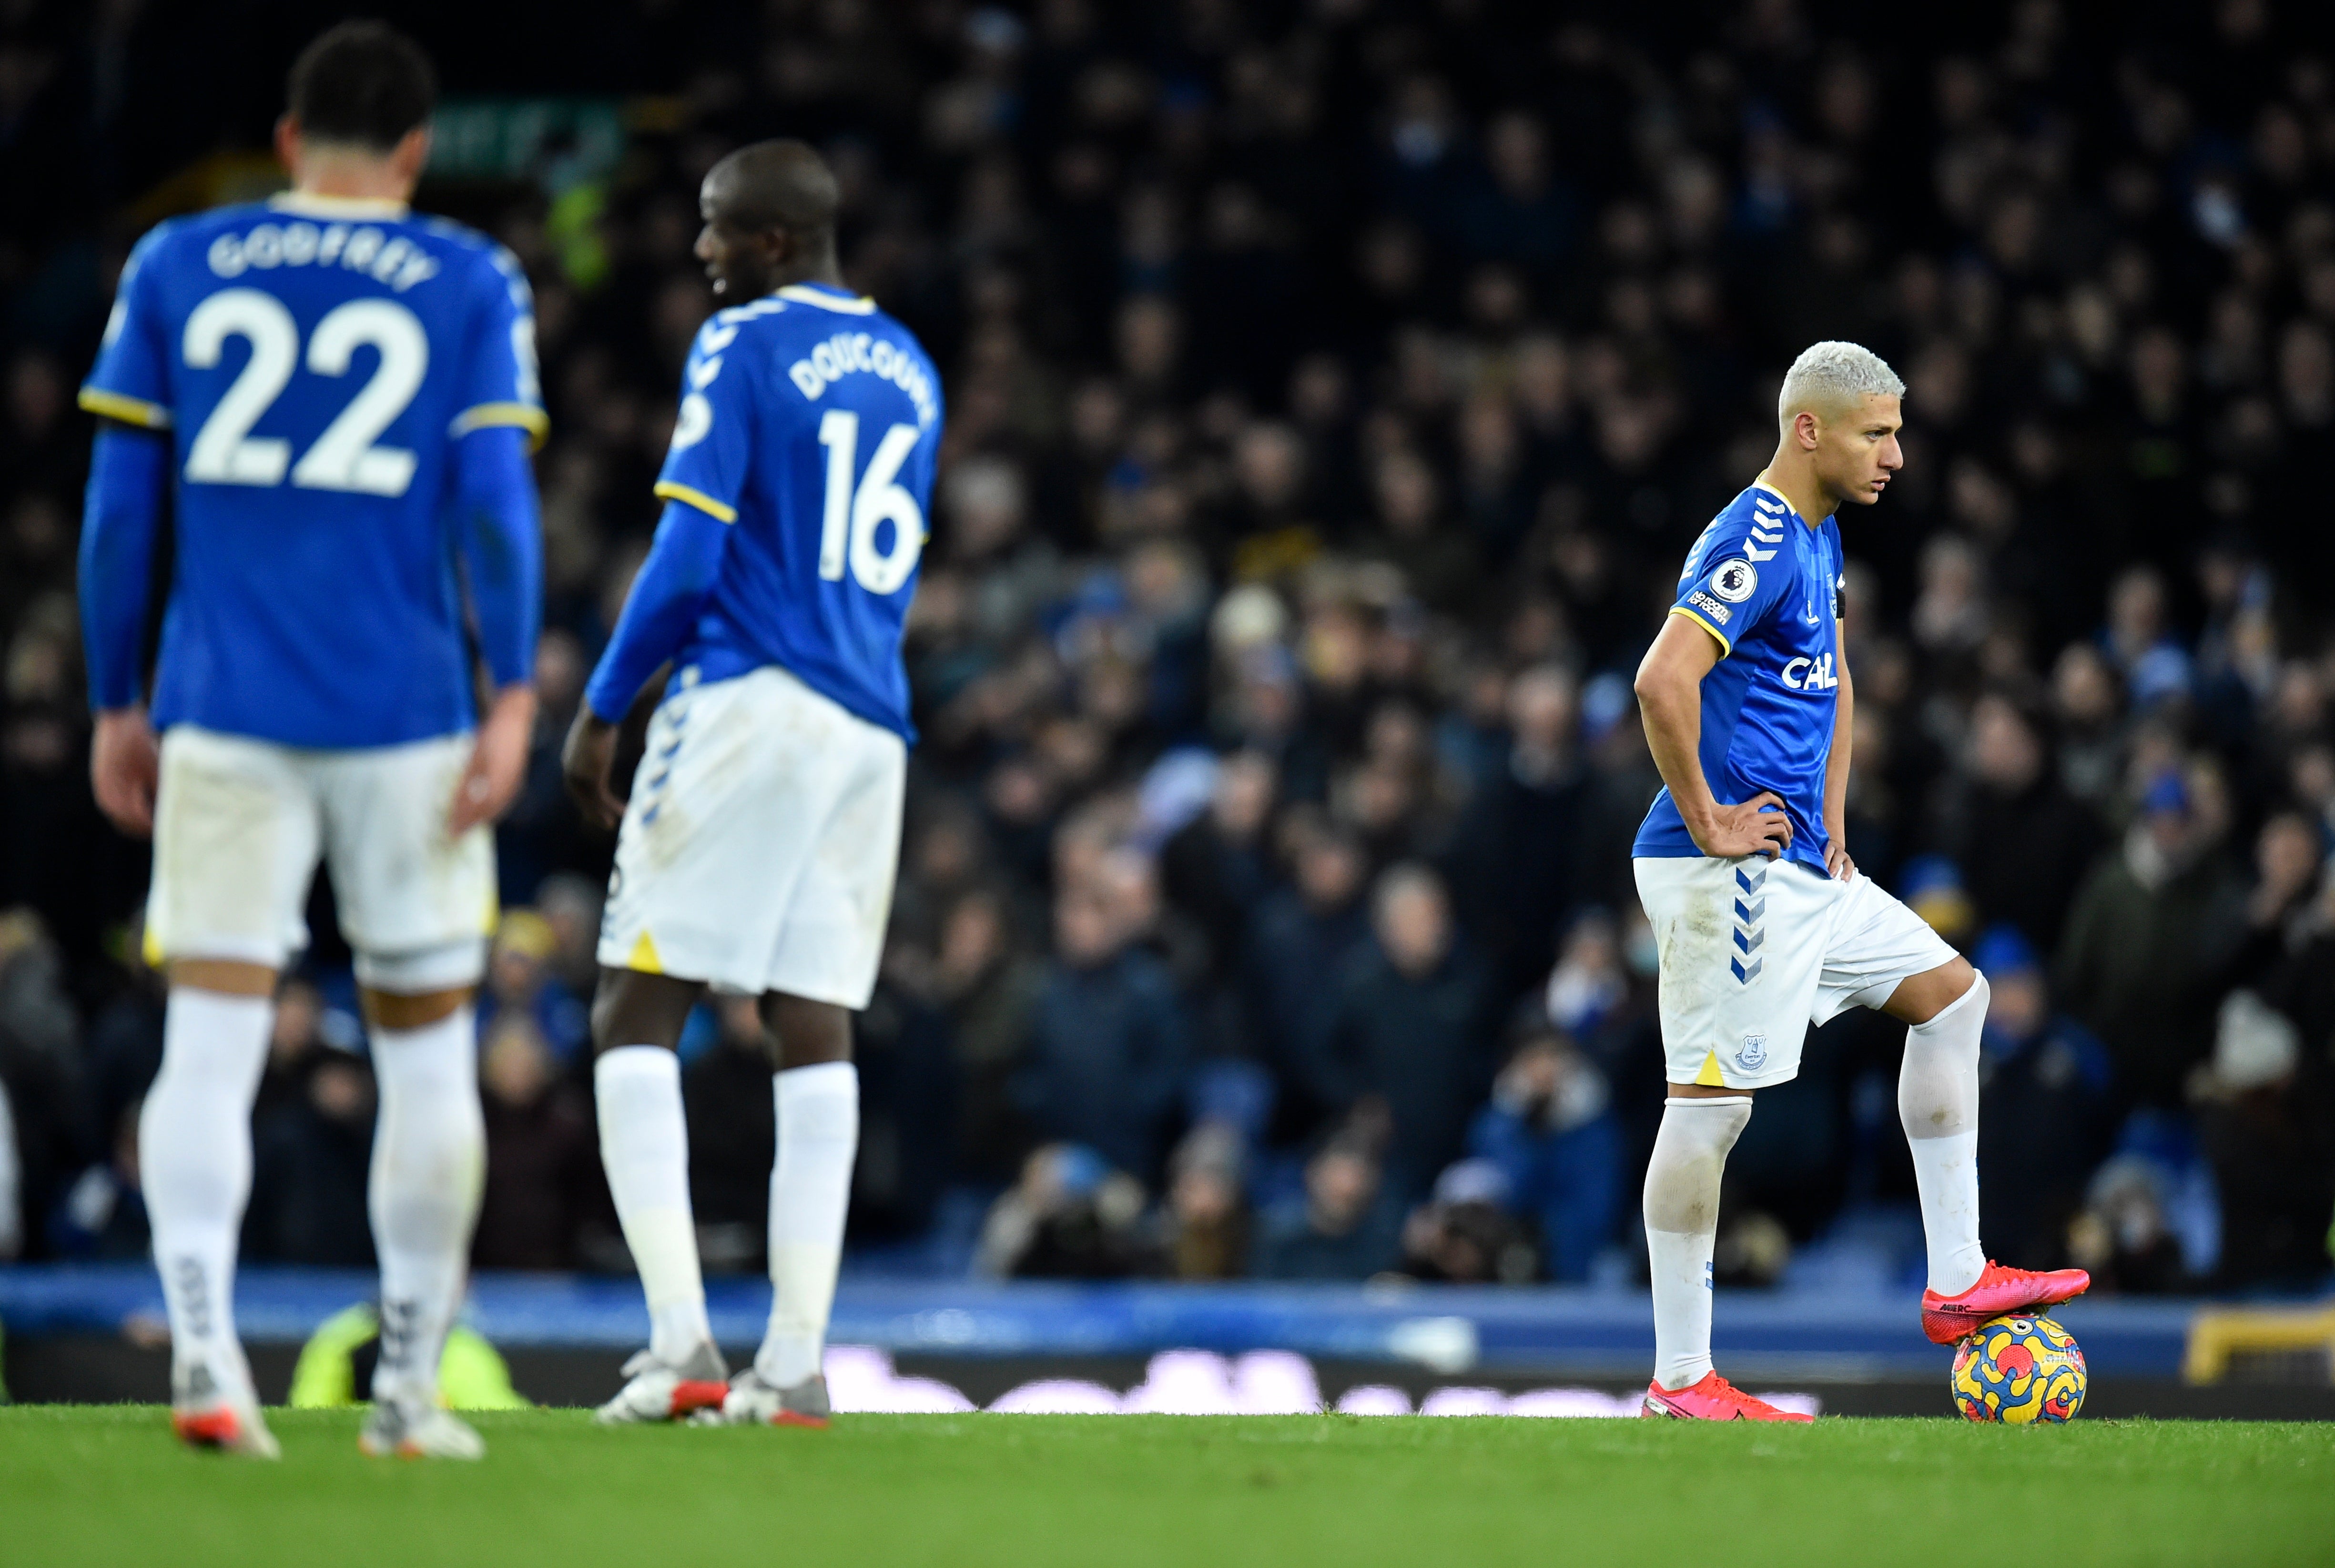 Players of Everton look downbeat after conceding the fourth goal